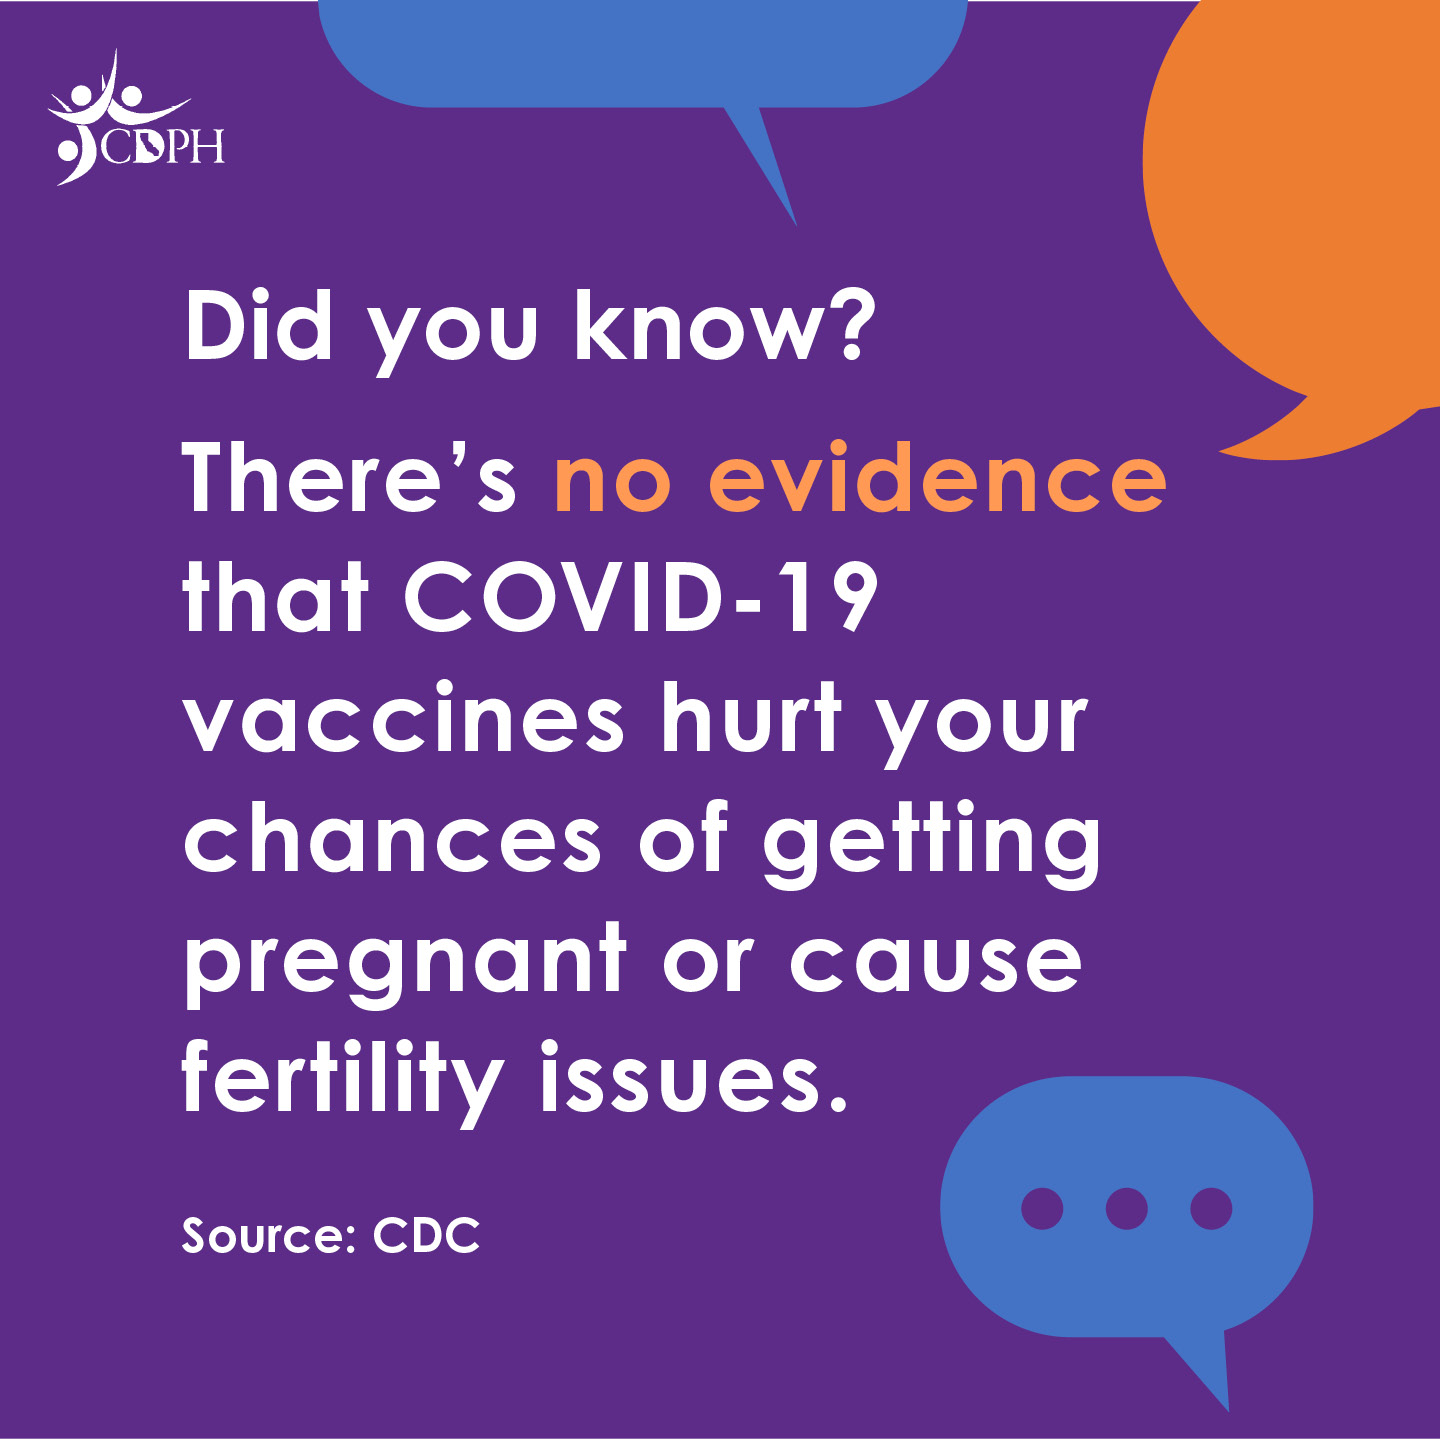 There's no evidence that COVID-19 vaccines hurt your chances of getting pregnant or cause fertility issues.